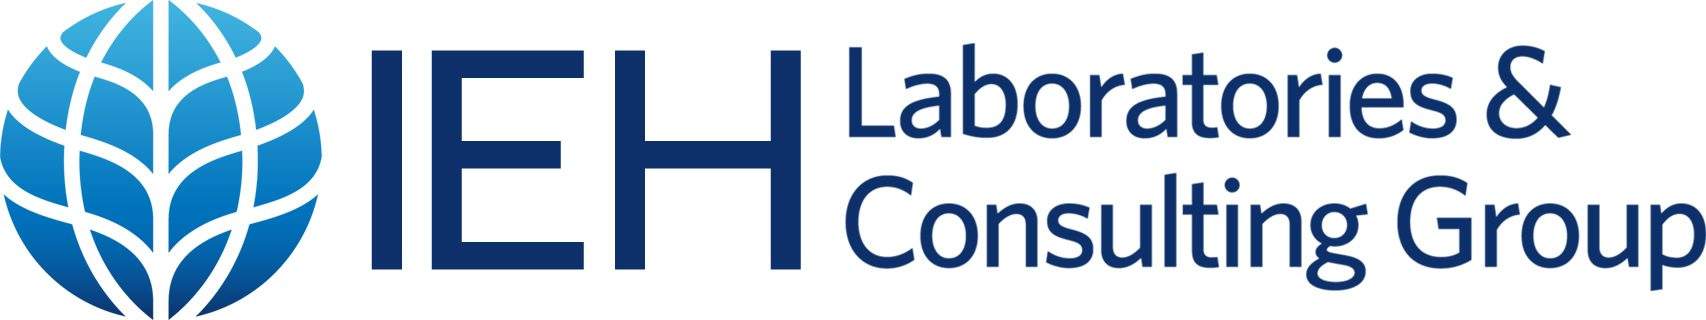 IEH Laboratories & Consulting Group – The Institute for Environmental Health